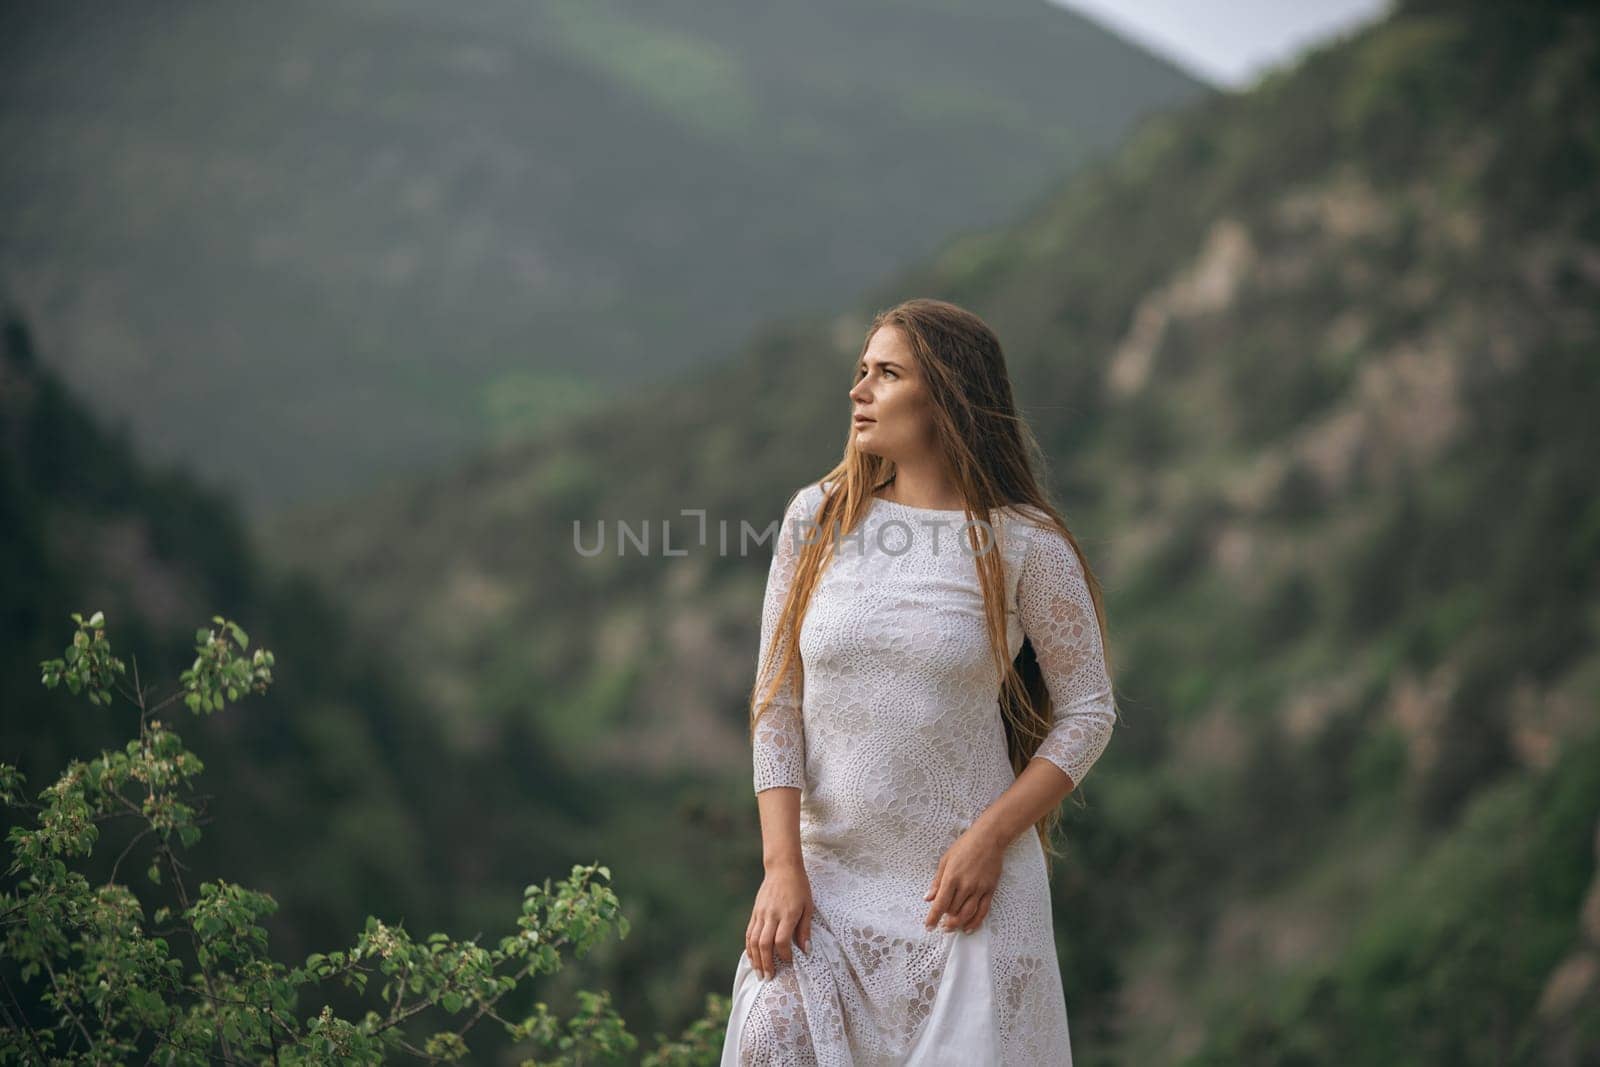 A woman in a white dress stands on a mountain top, looking out over the landscape. The scene is serene and peaceful, with the woman's long hair blowing in the wind